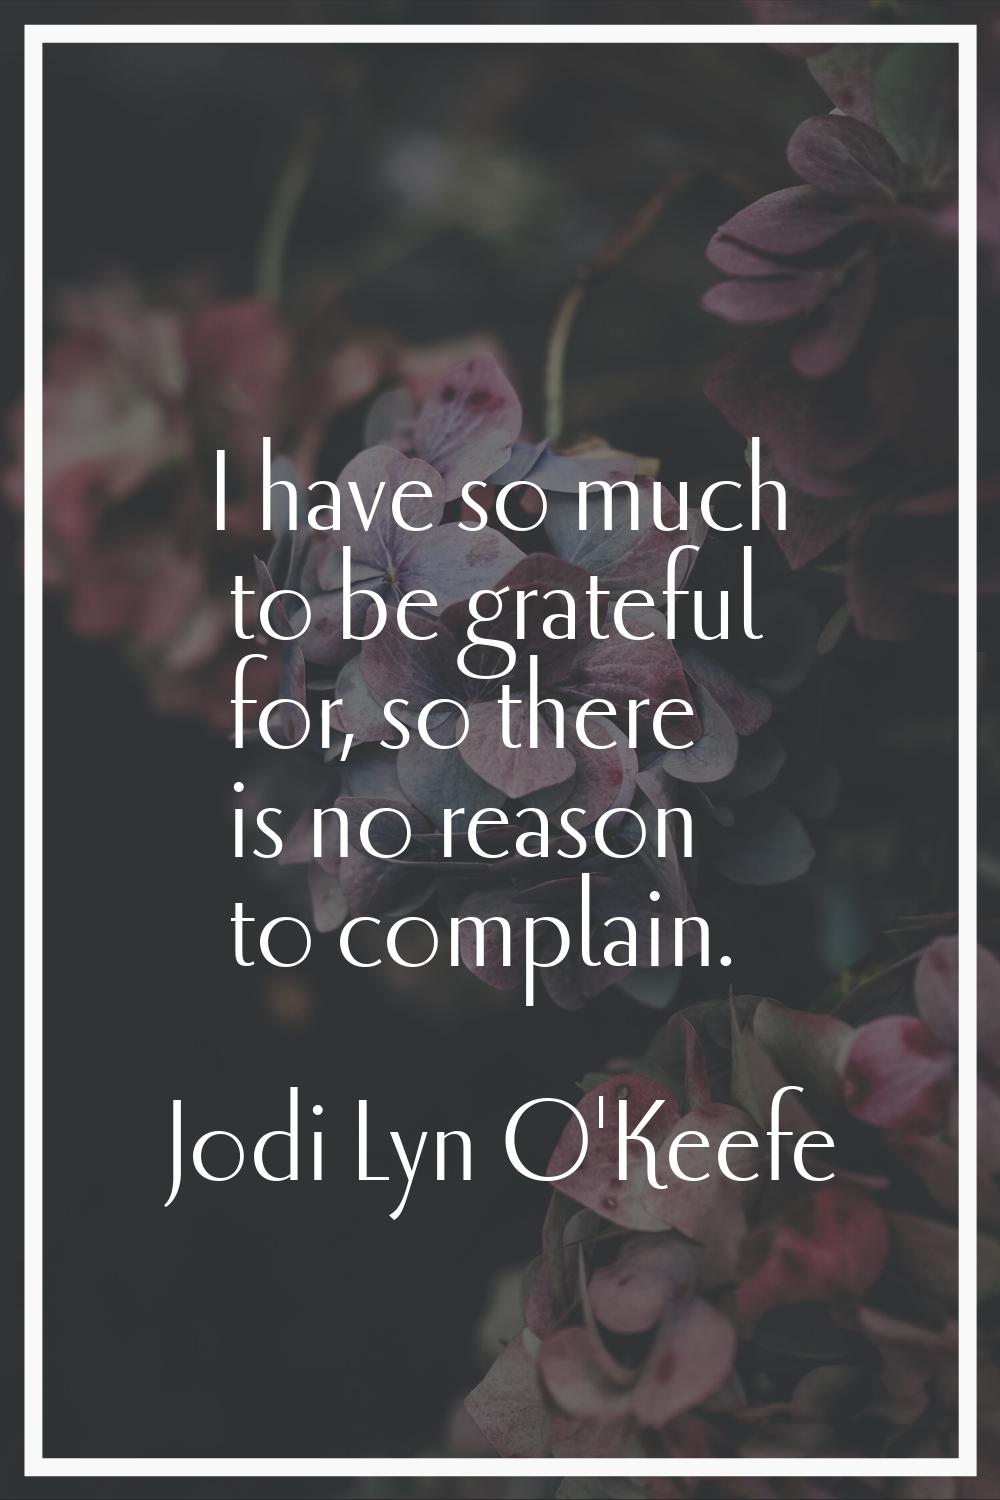 I have so much to be grateful for, so there is no reason to complain.